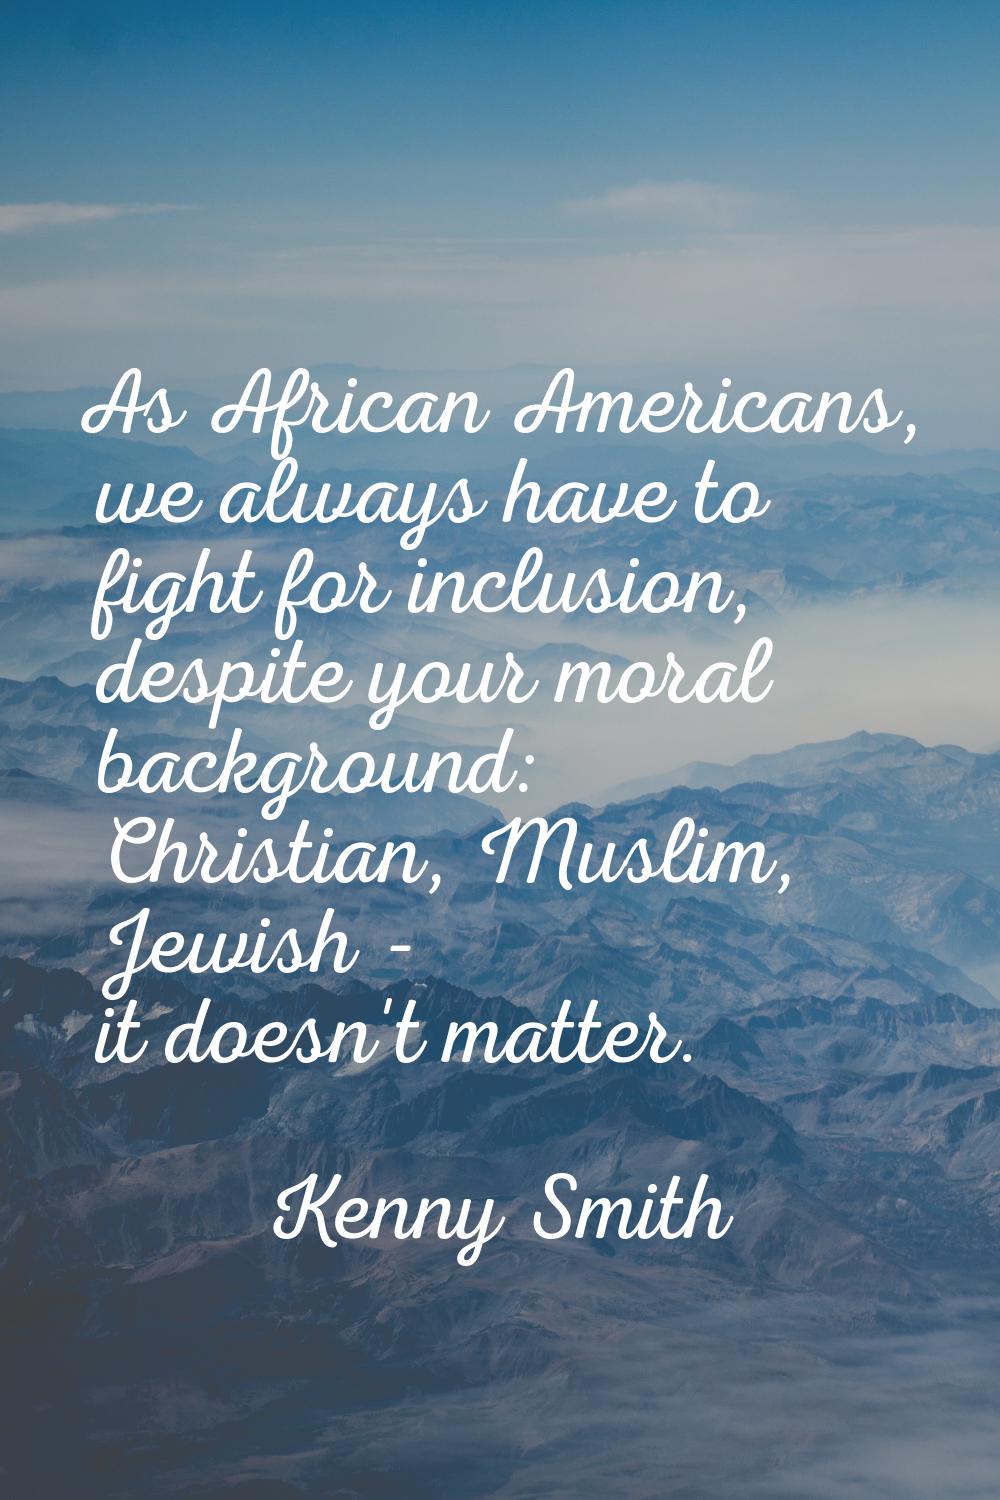 As African Americans, we always have to fight for inclusion, despite your moral background: Christi